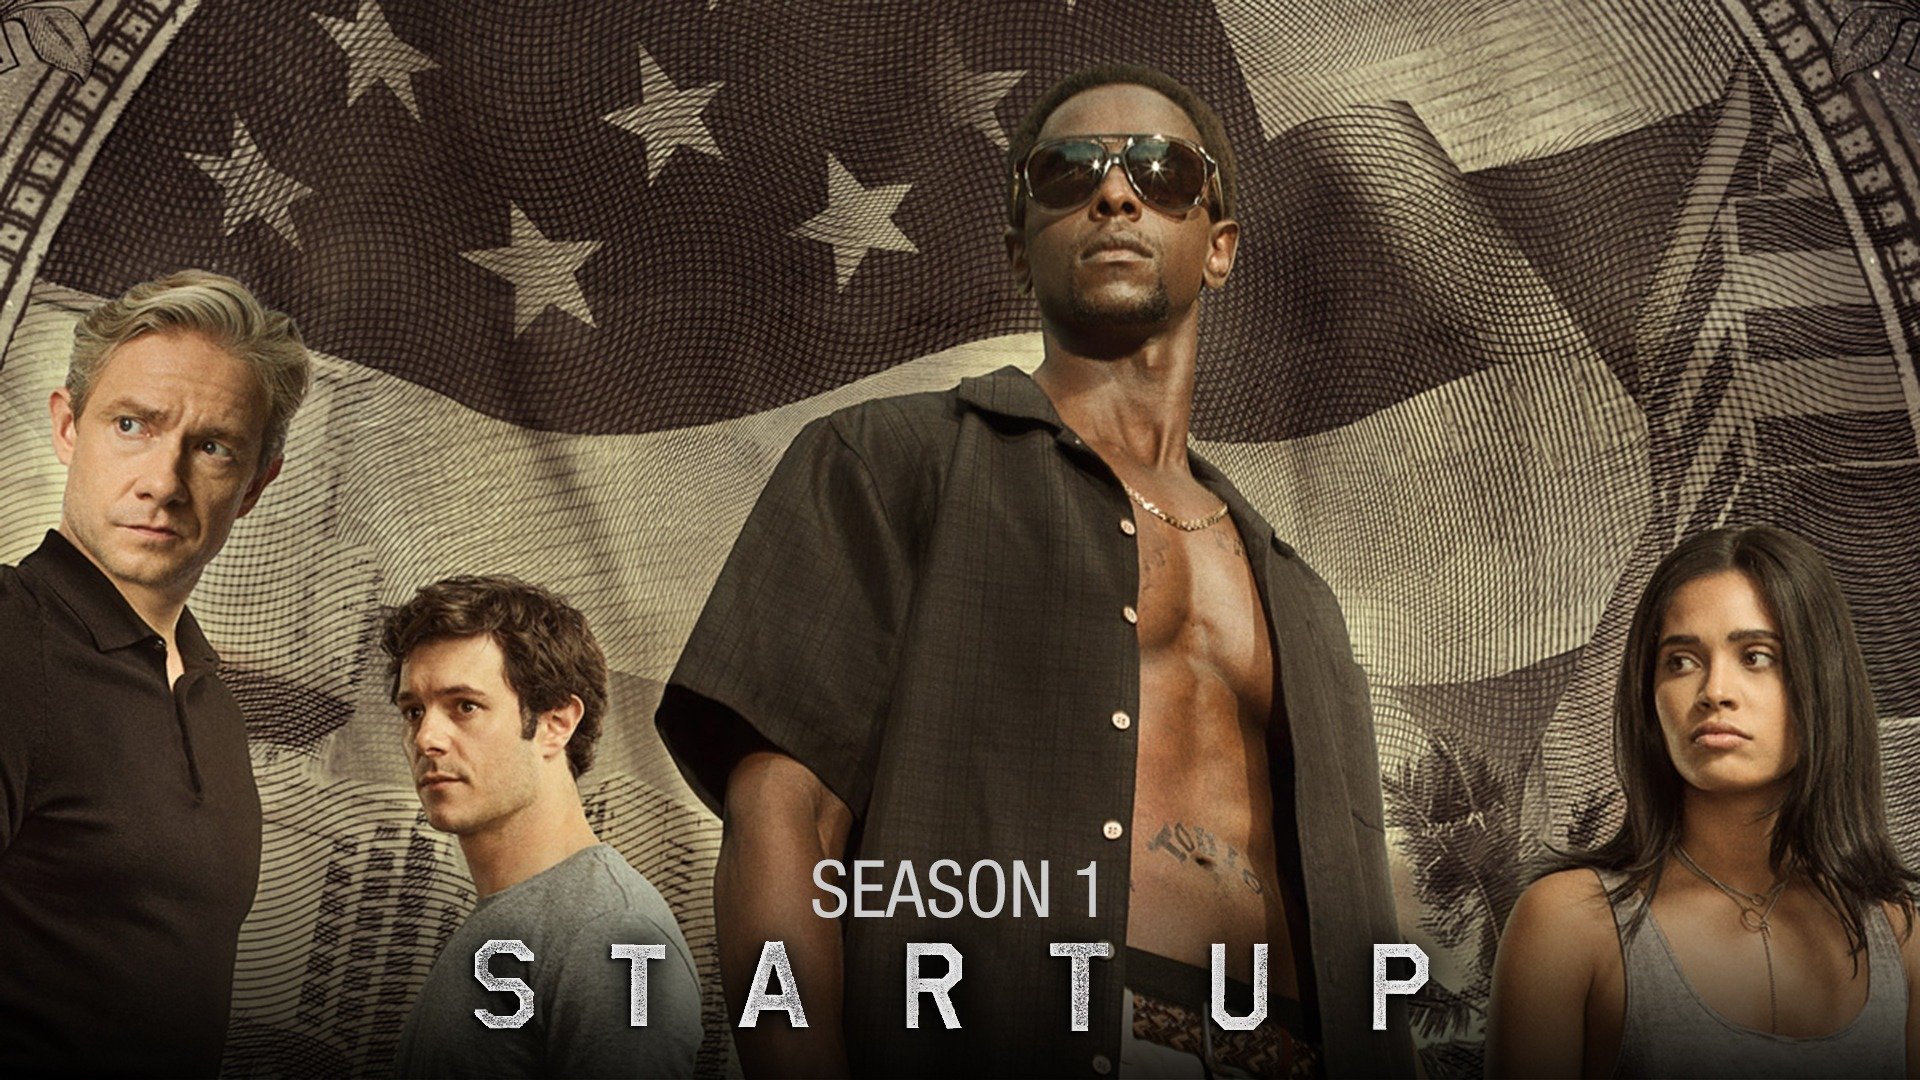 StartUp season 4 release date, cast, synopsis, trailer and more